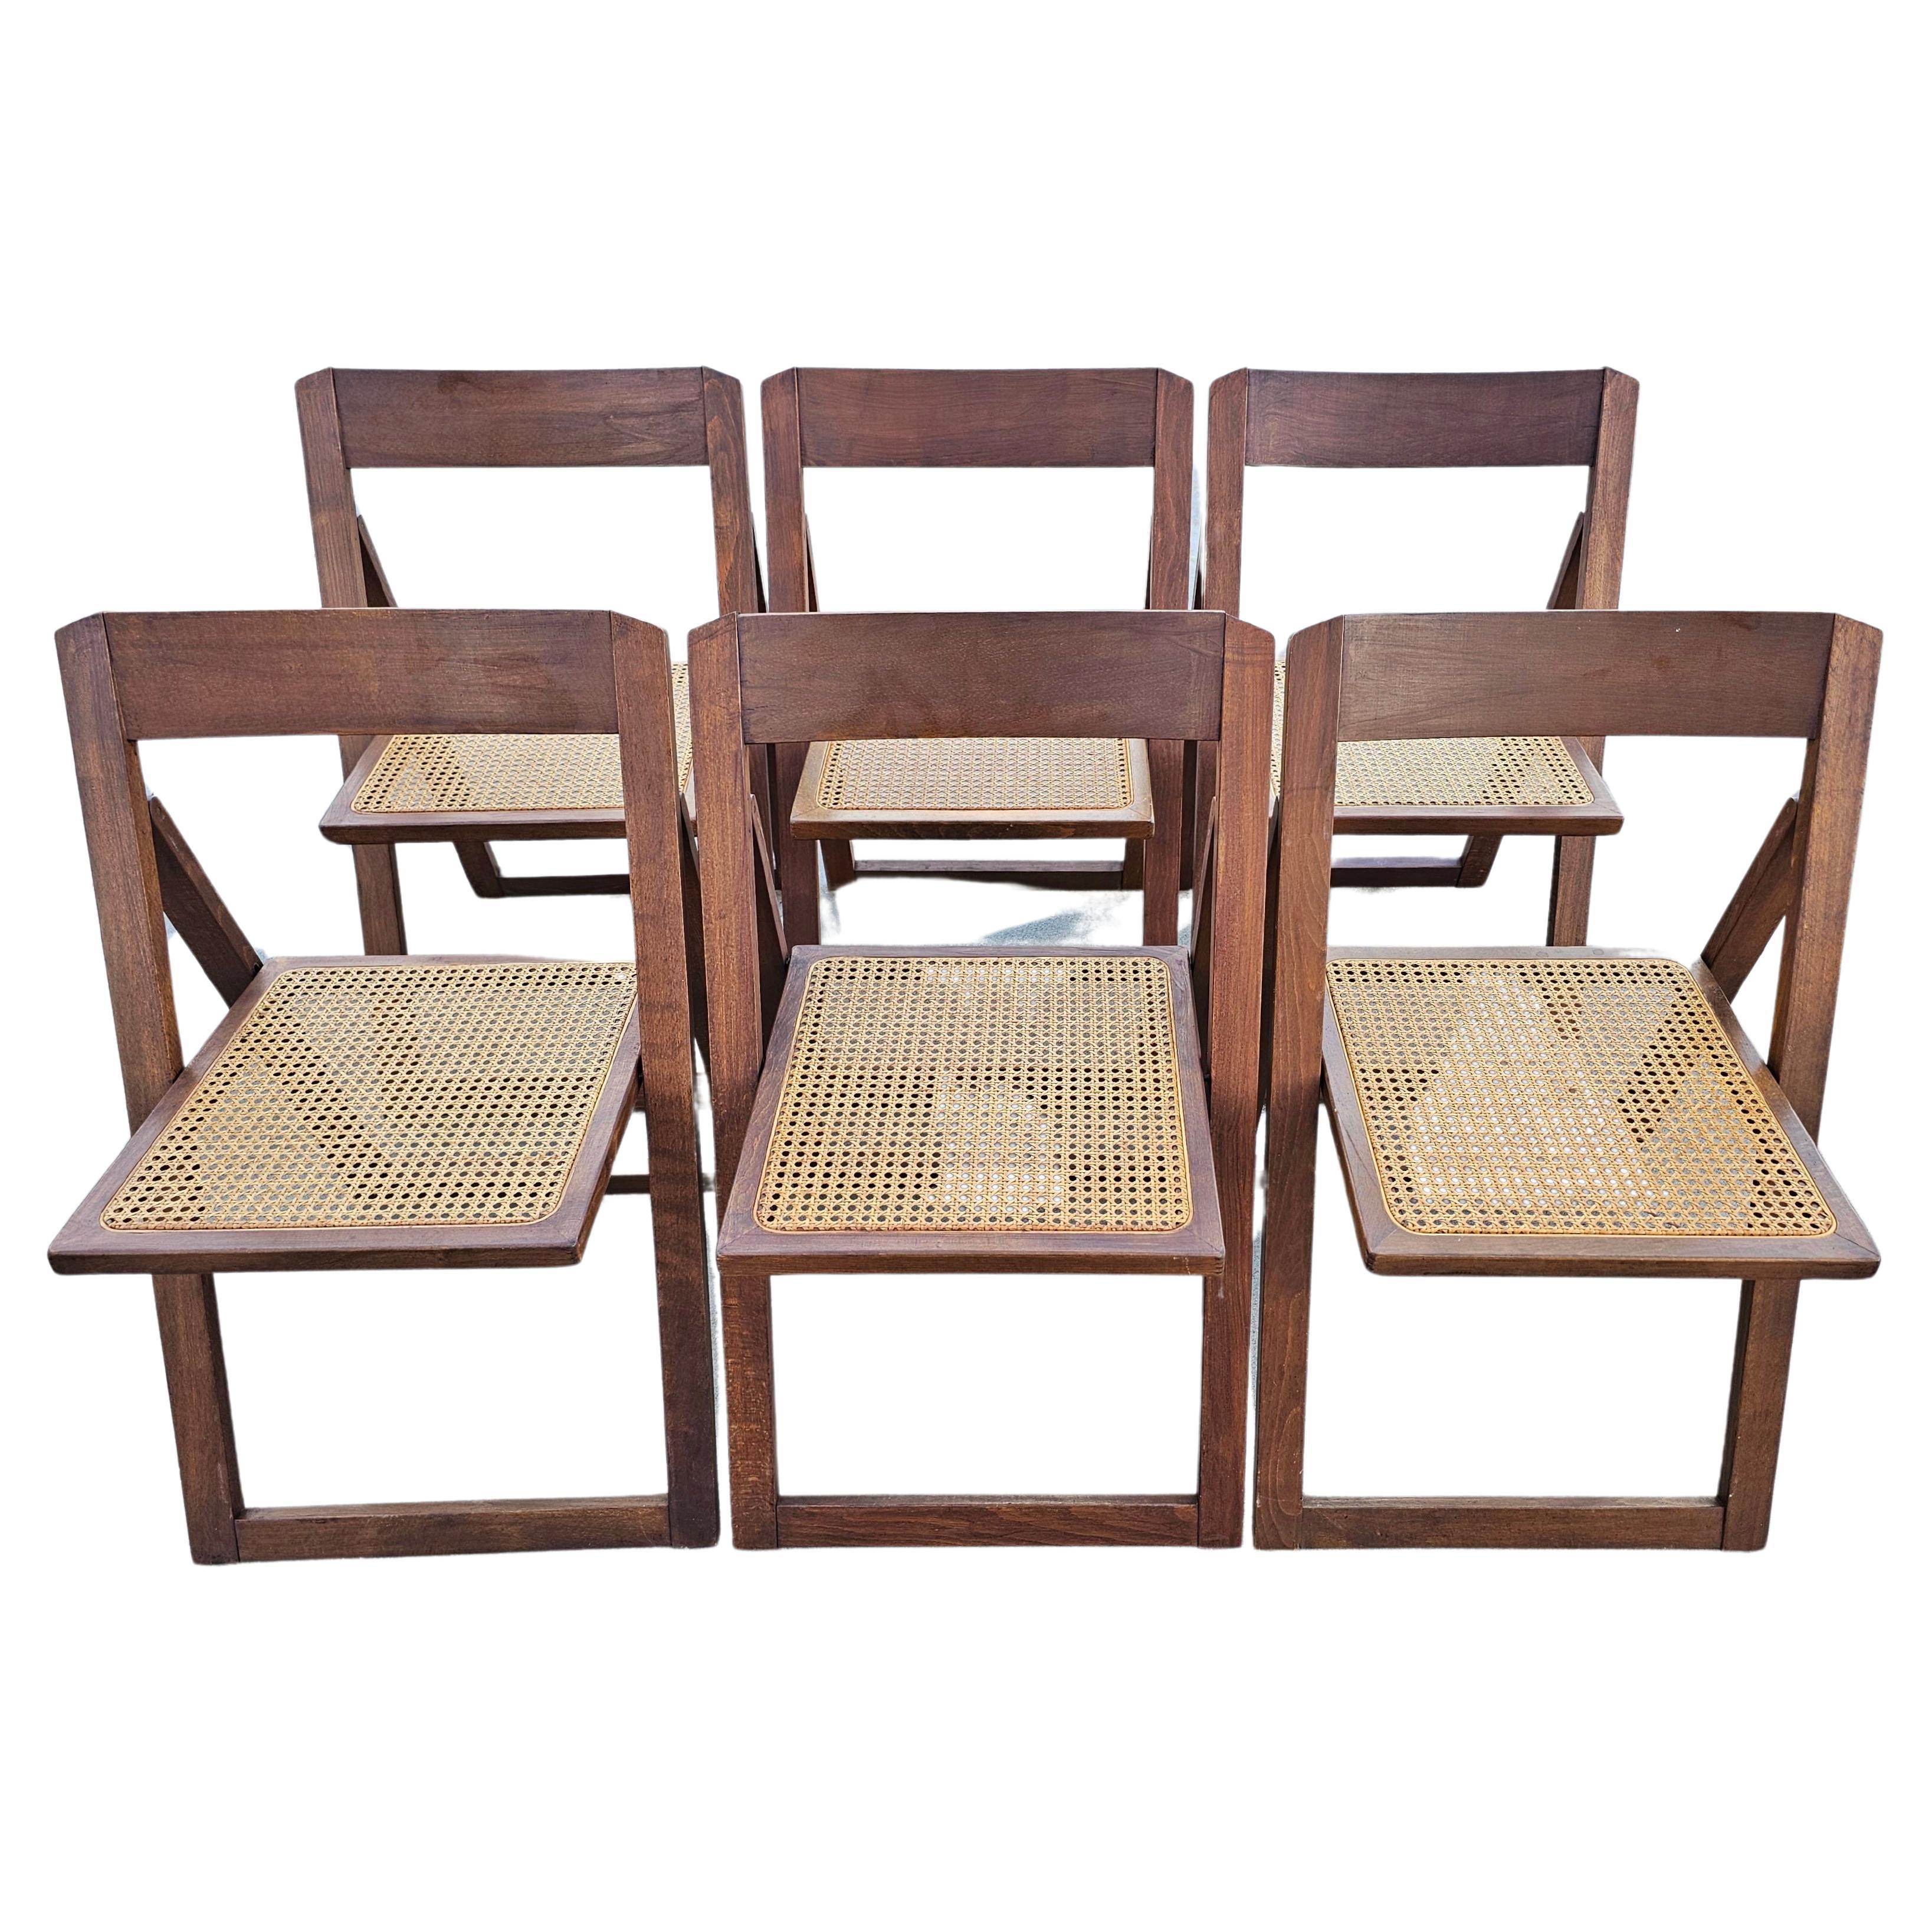 Set of 6 Folding Chairs with Cane Seats in style of Aldo Jacober, Italy 1980s